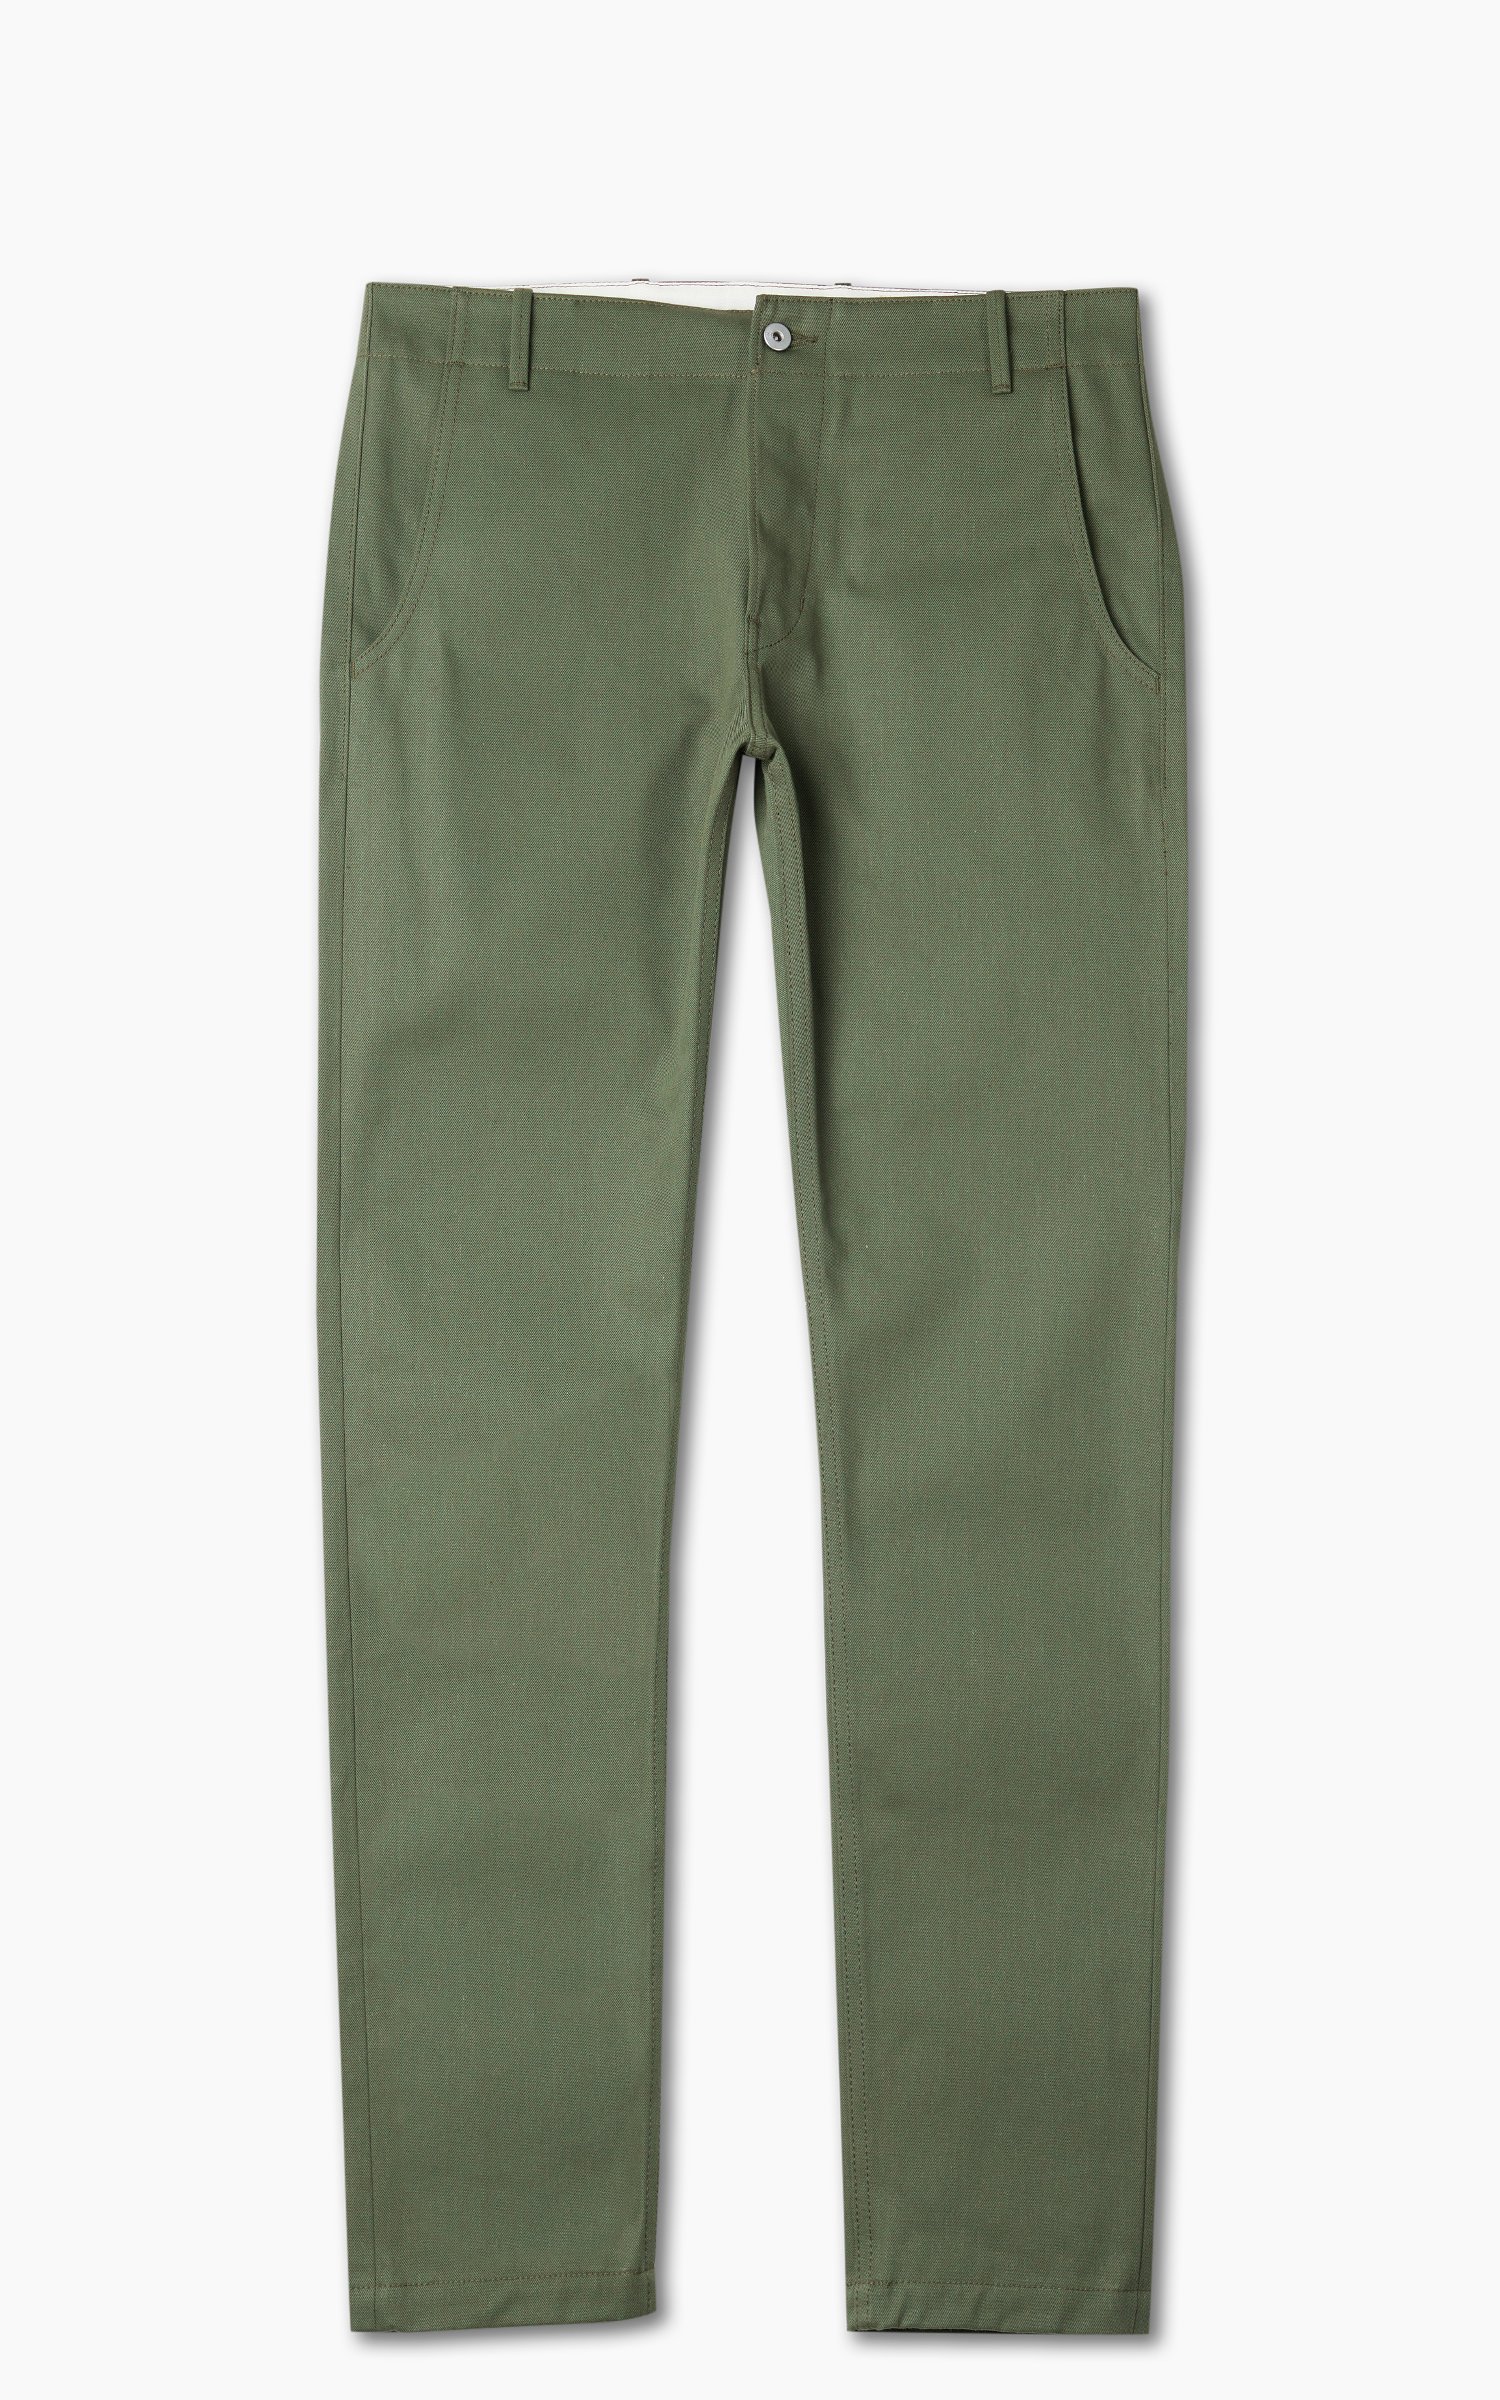 Rogue Territory Infantry Pants Green Selvedge | Cultizm